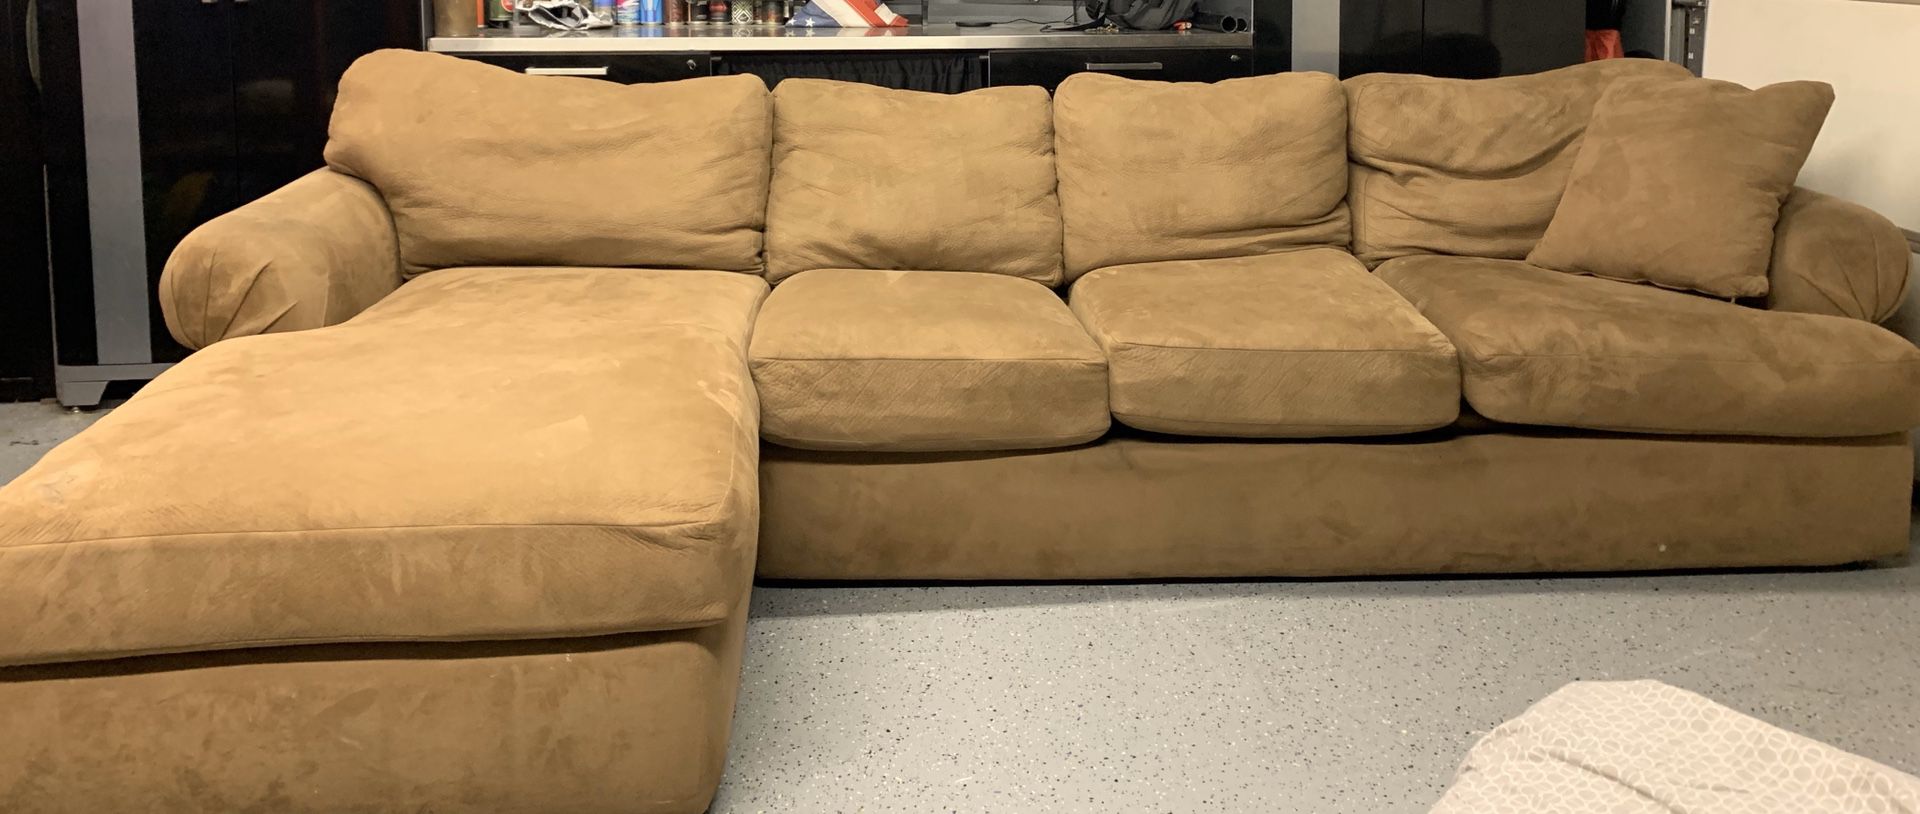 Microsuede couch. 11’ width. Chaise section extends 5’9”